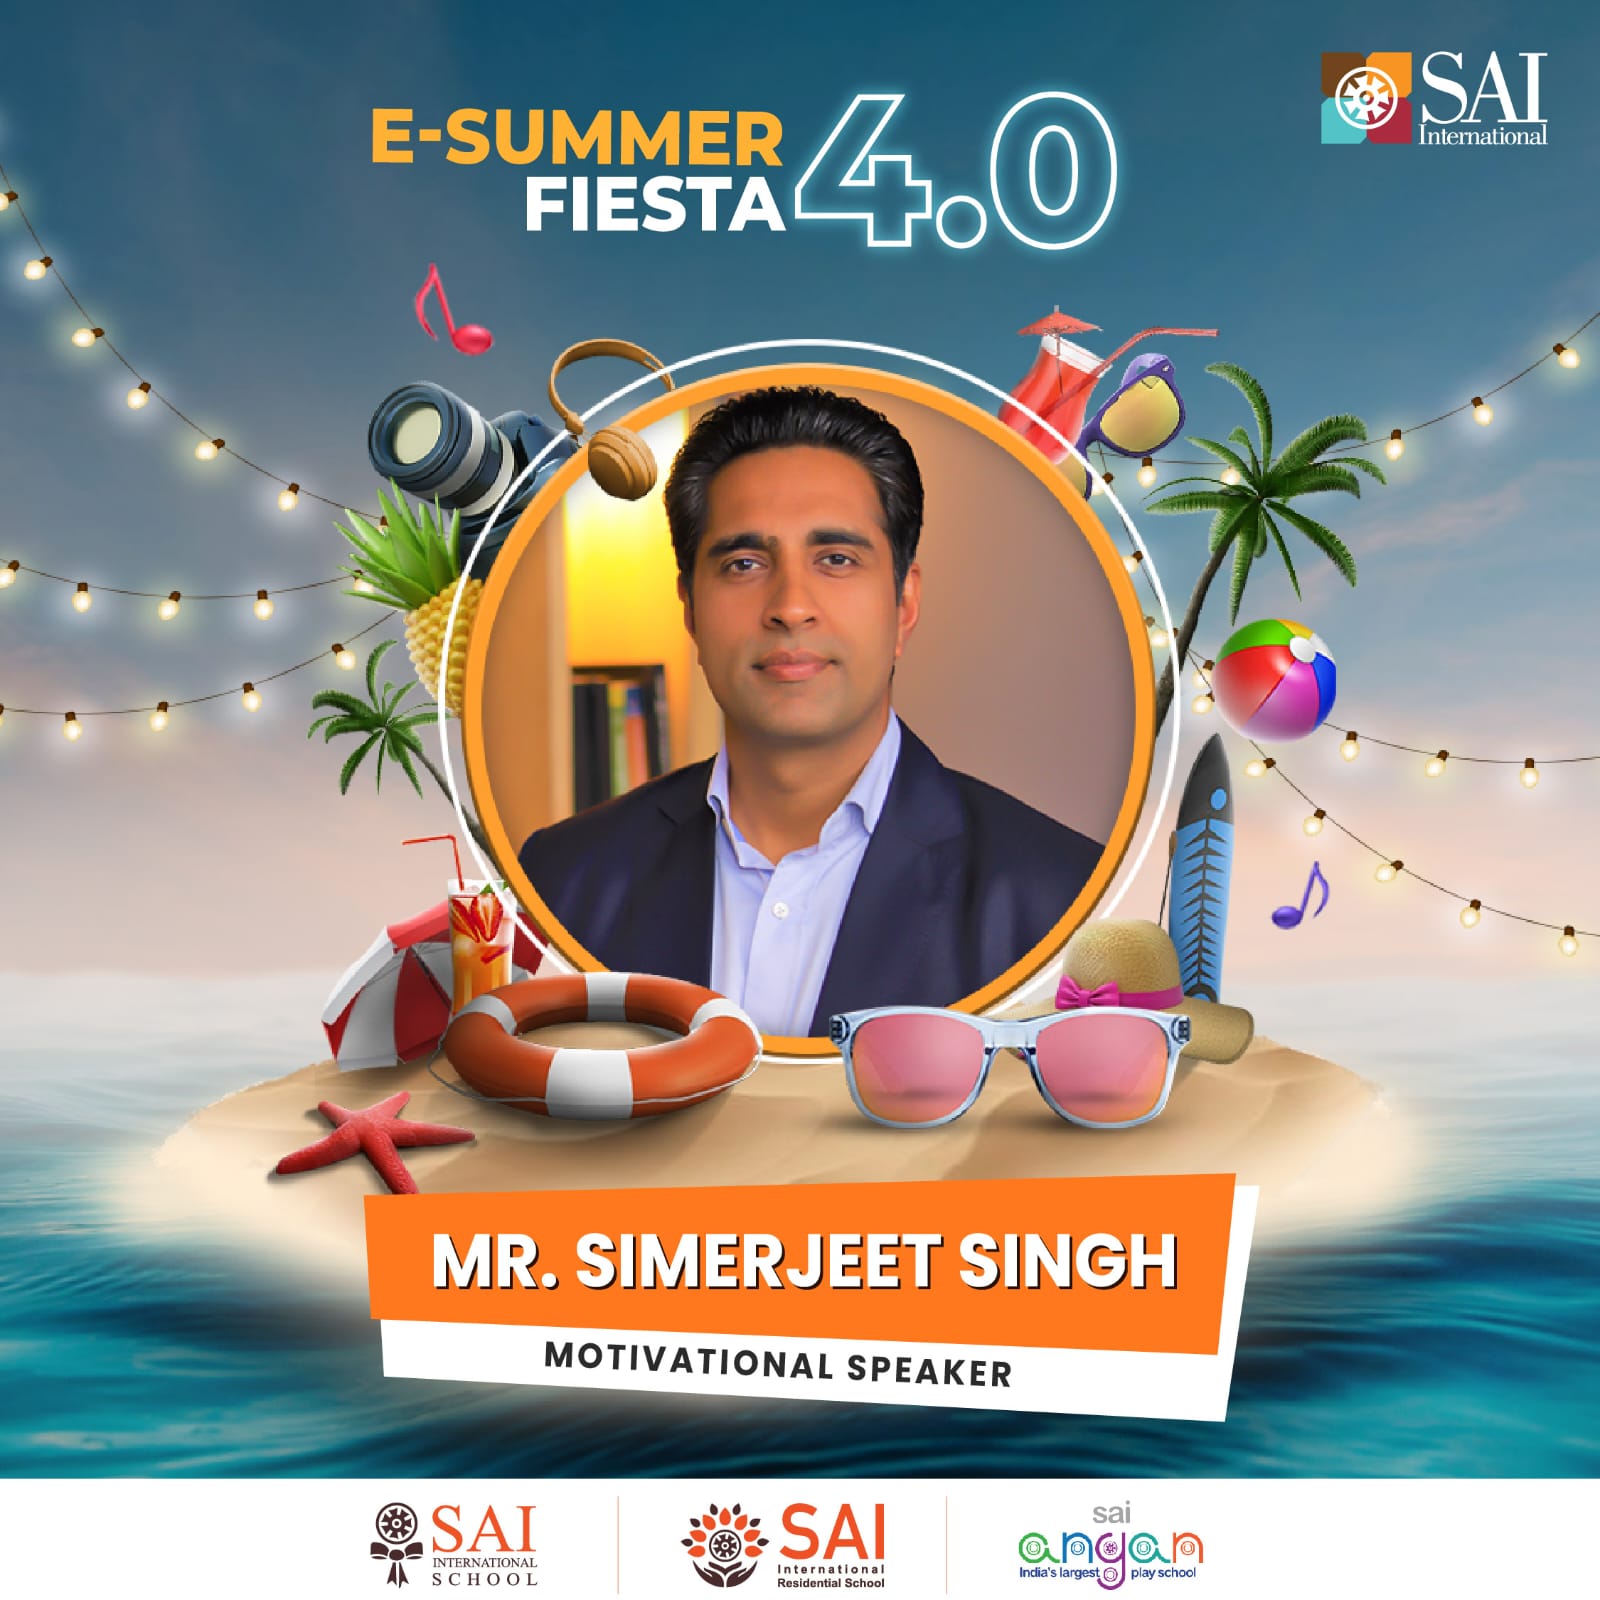 With a series of intriguing activities, SAI International Education Group introduces E-Summer Fiesta Season 4.0 decoding=